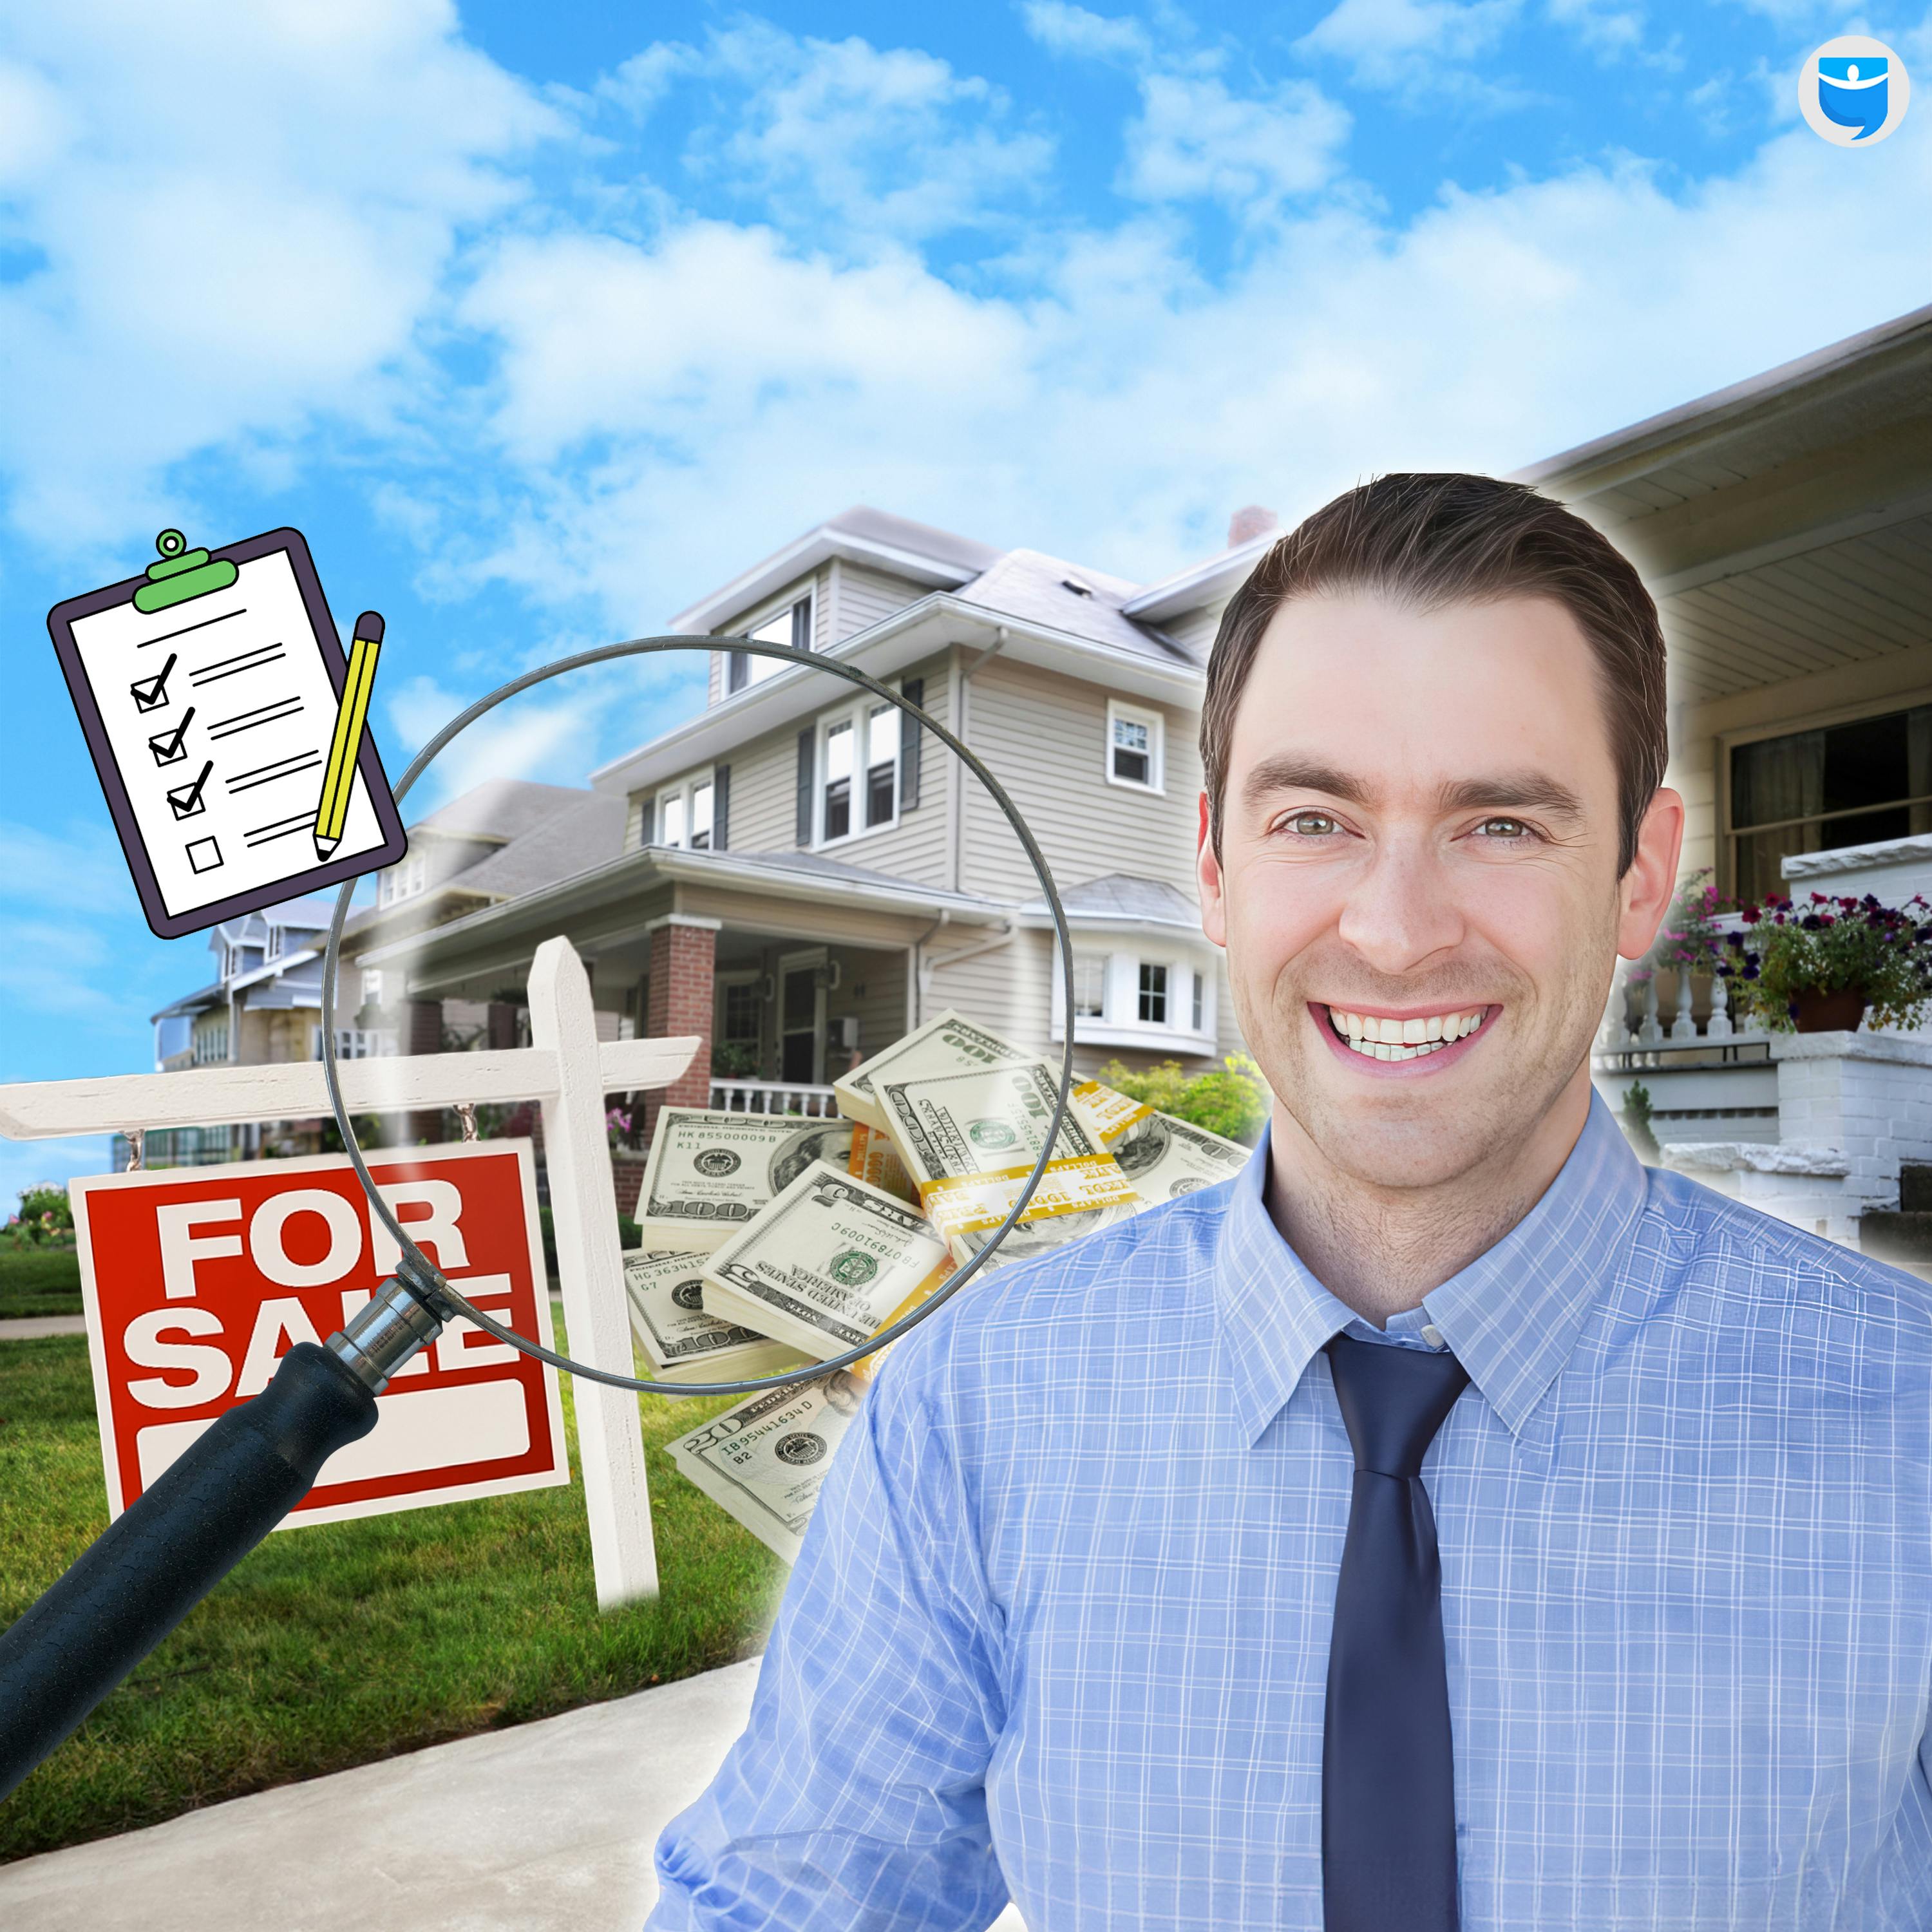 901: The 6 Beginner Steps to Take Before Investing in Real Estate